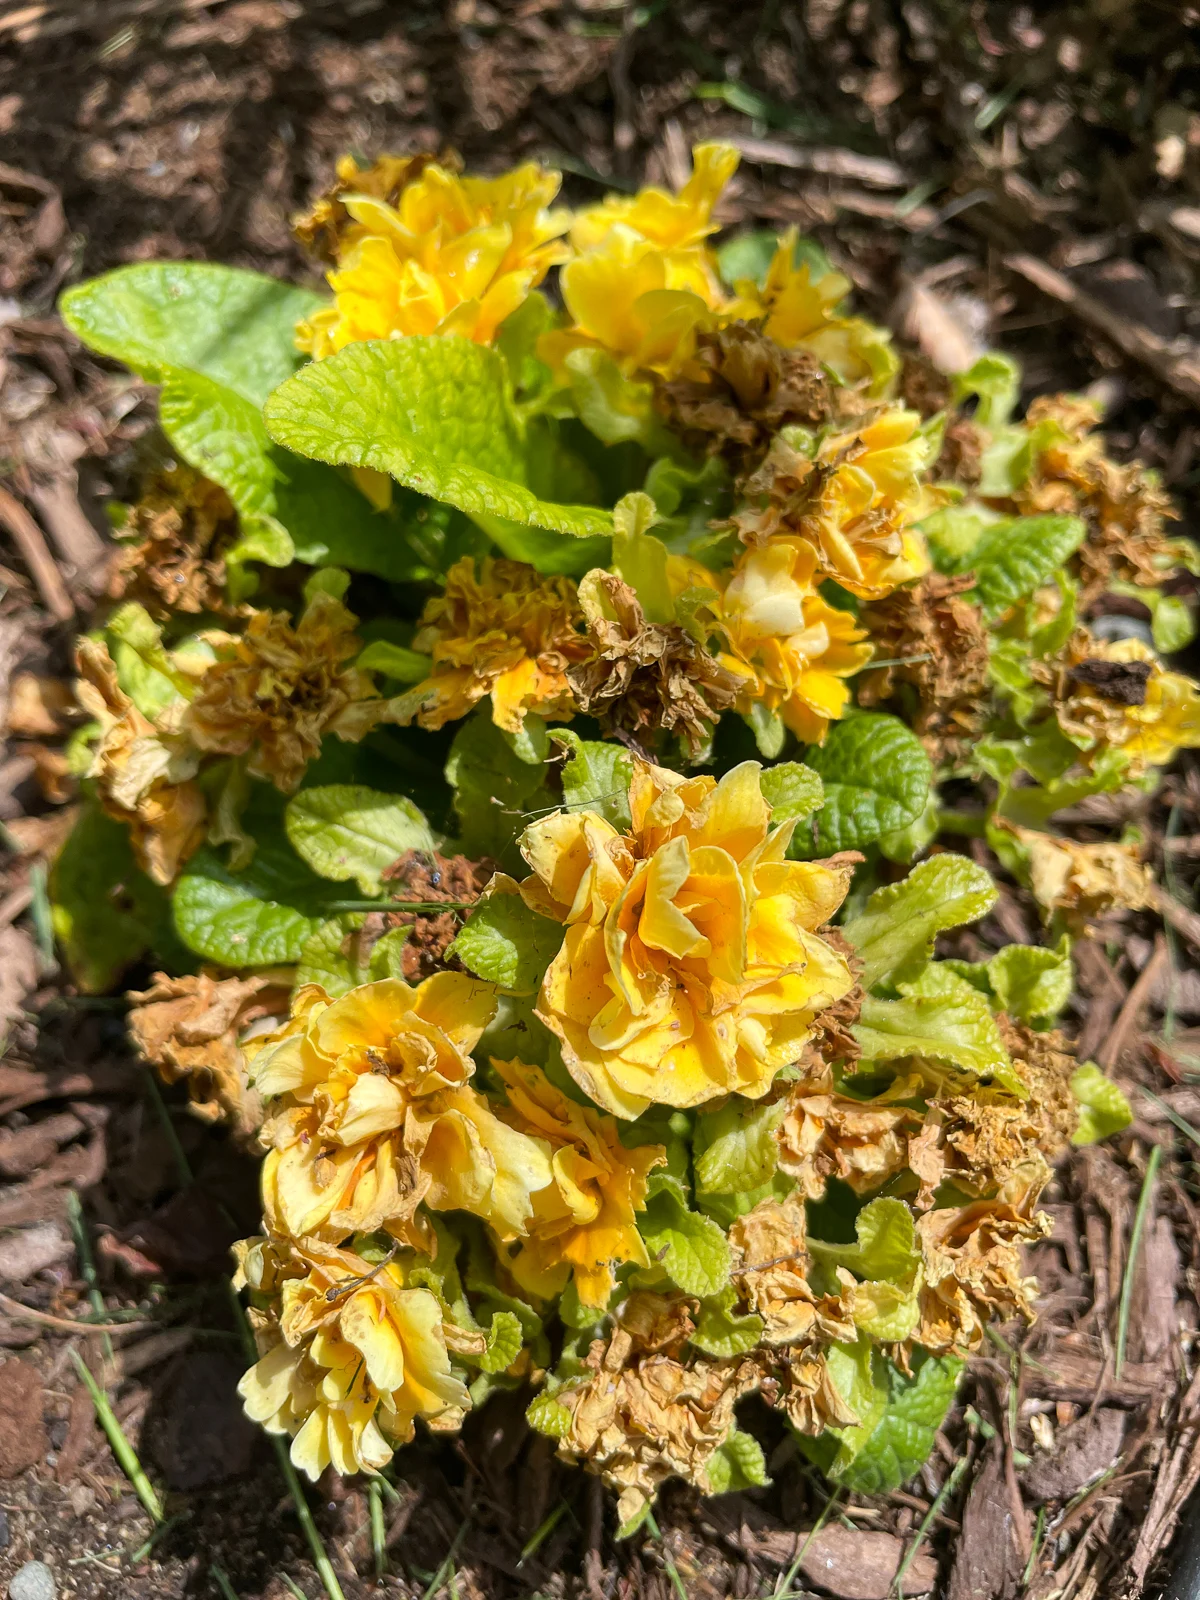 yellow primrose with some spent blooms